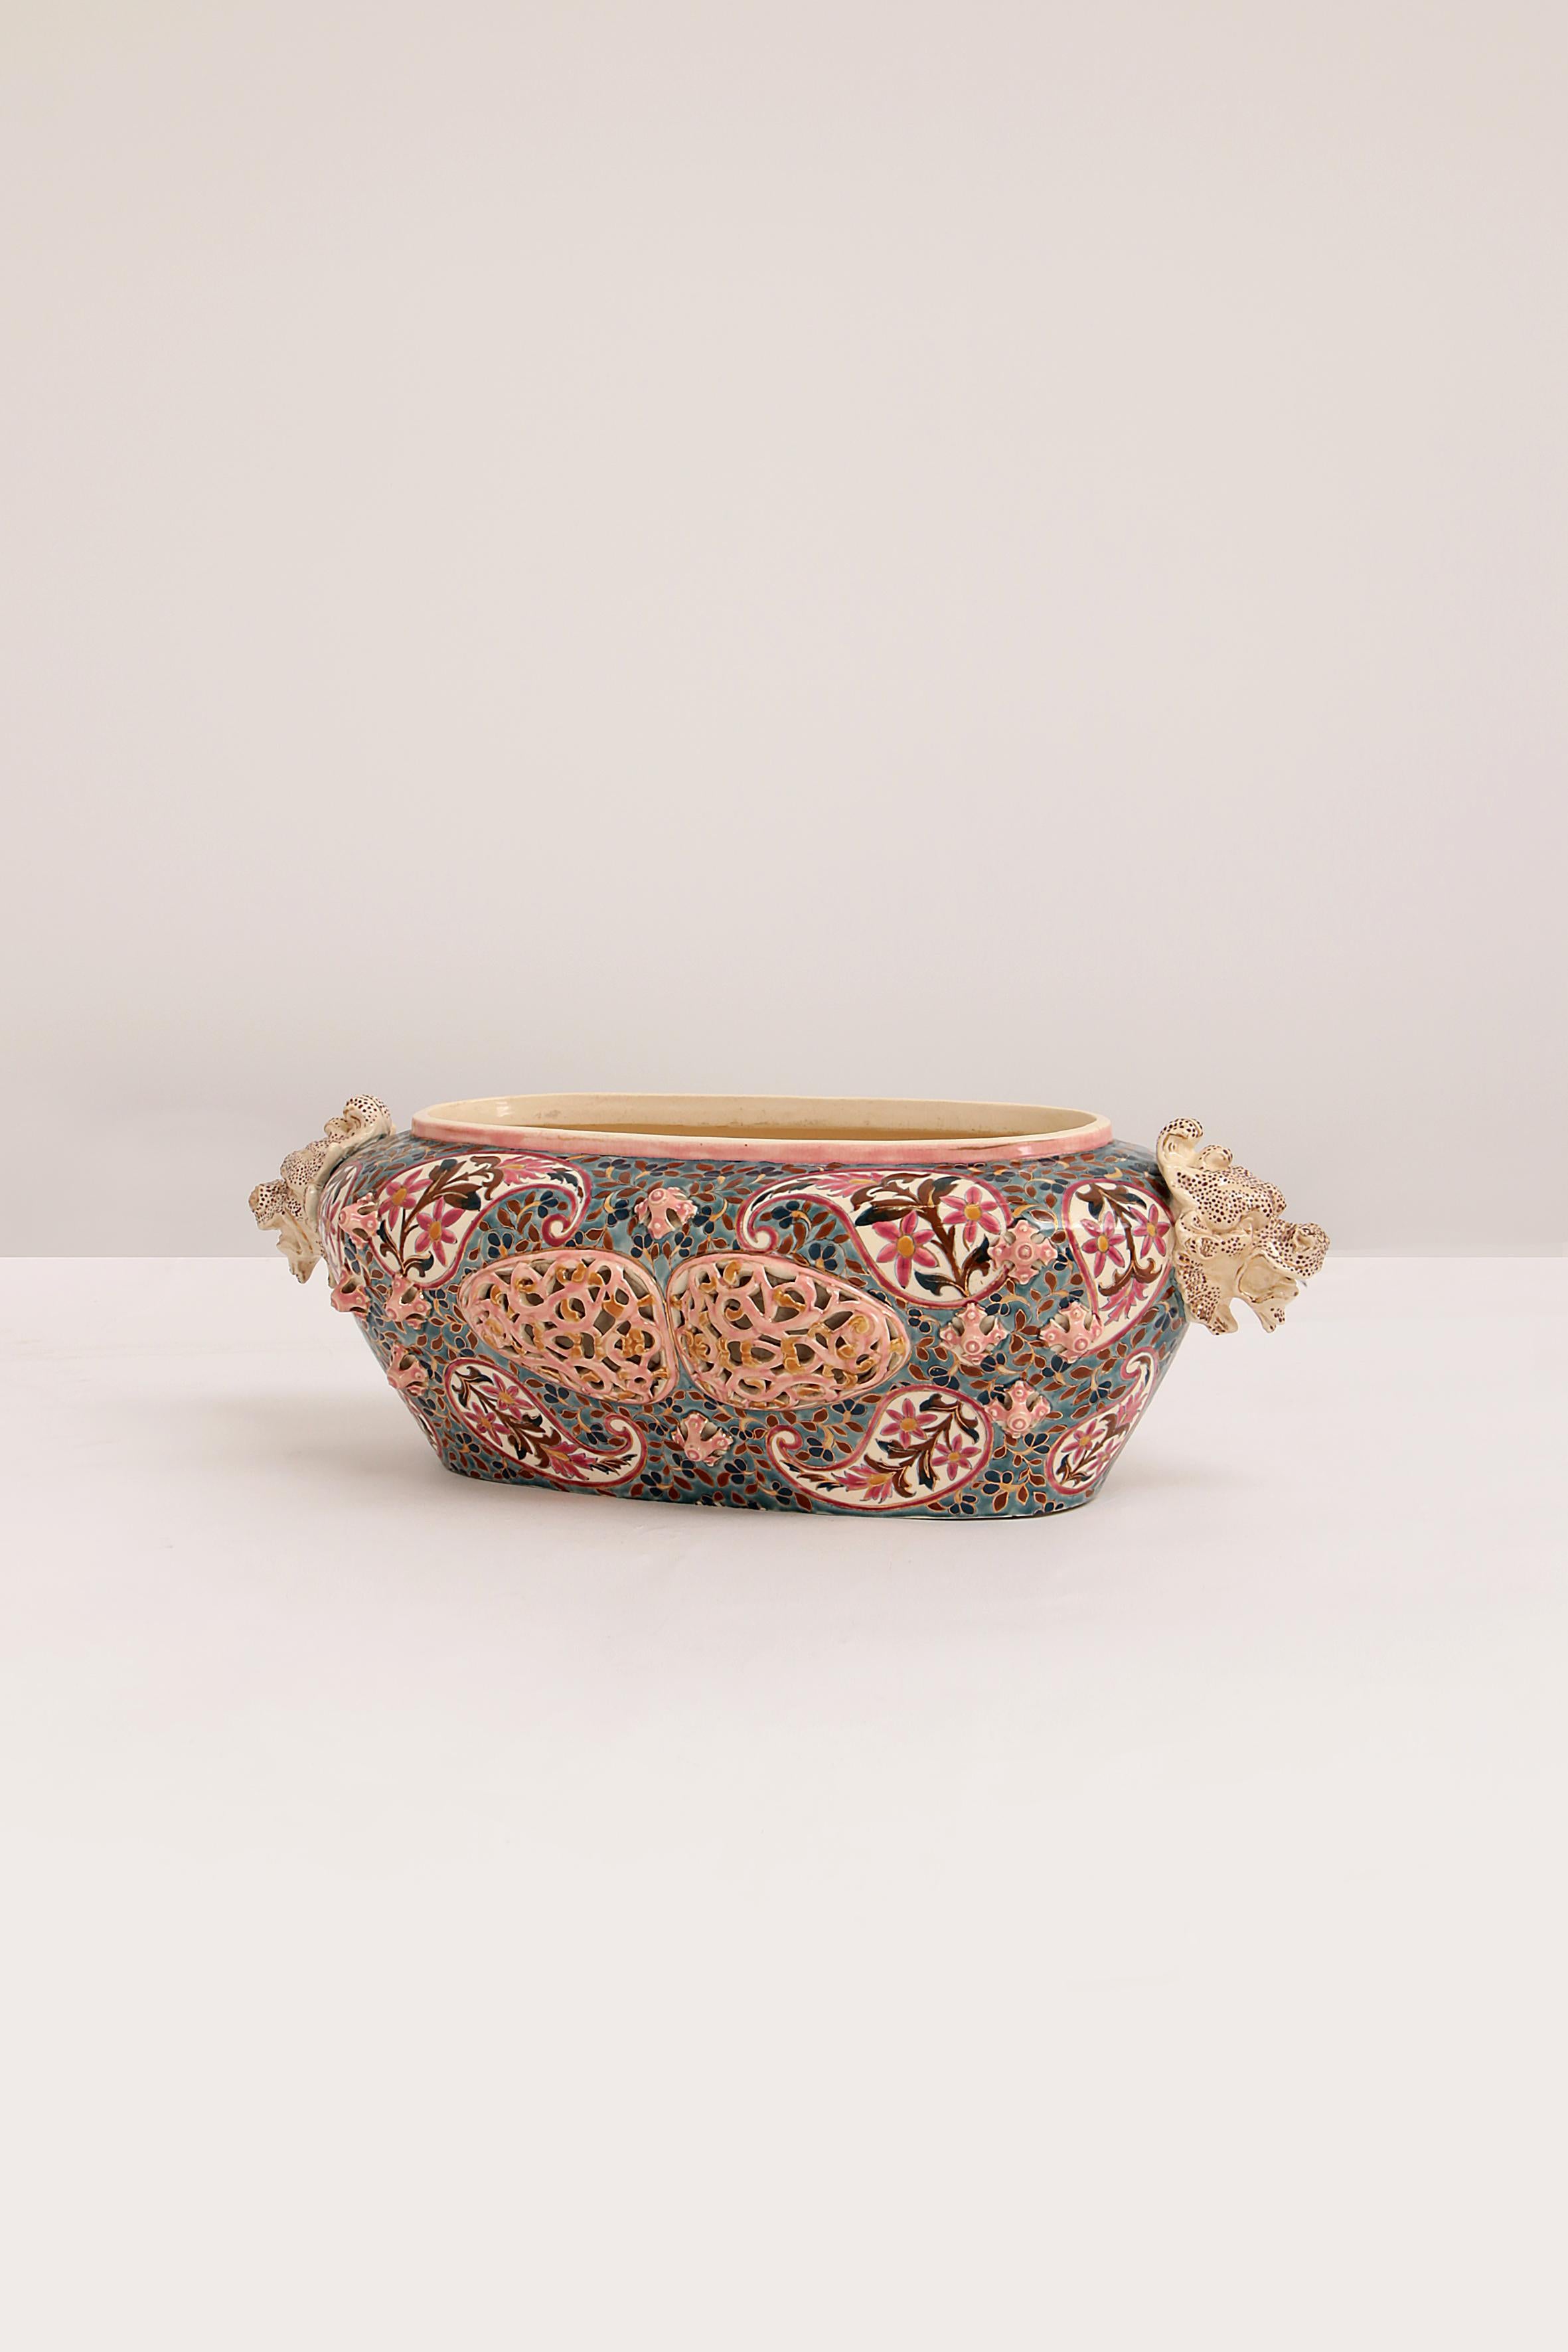 Very rare large Fischer Budapest centerpiece or jardinière painted with intricate brightly colored decoration.

It has colorful handles with a reticulated pattern and three reticulated panels with pink and green borders on the front and